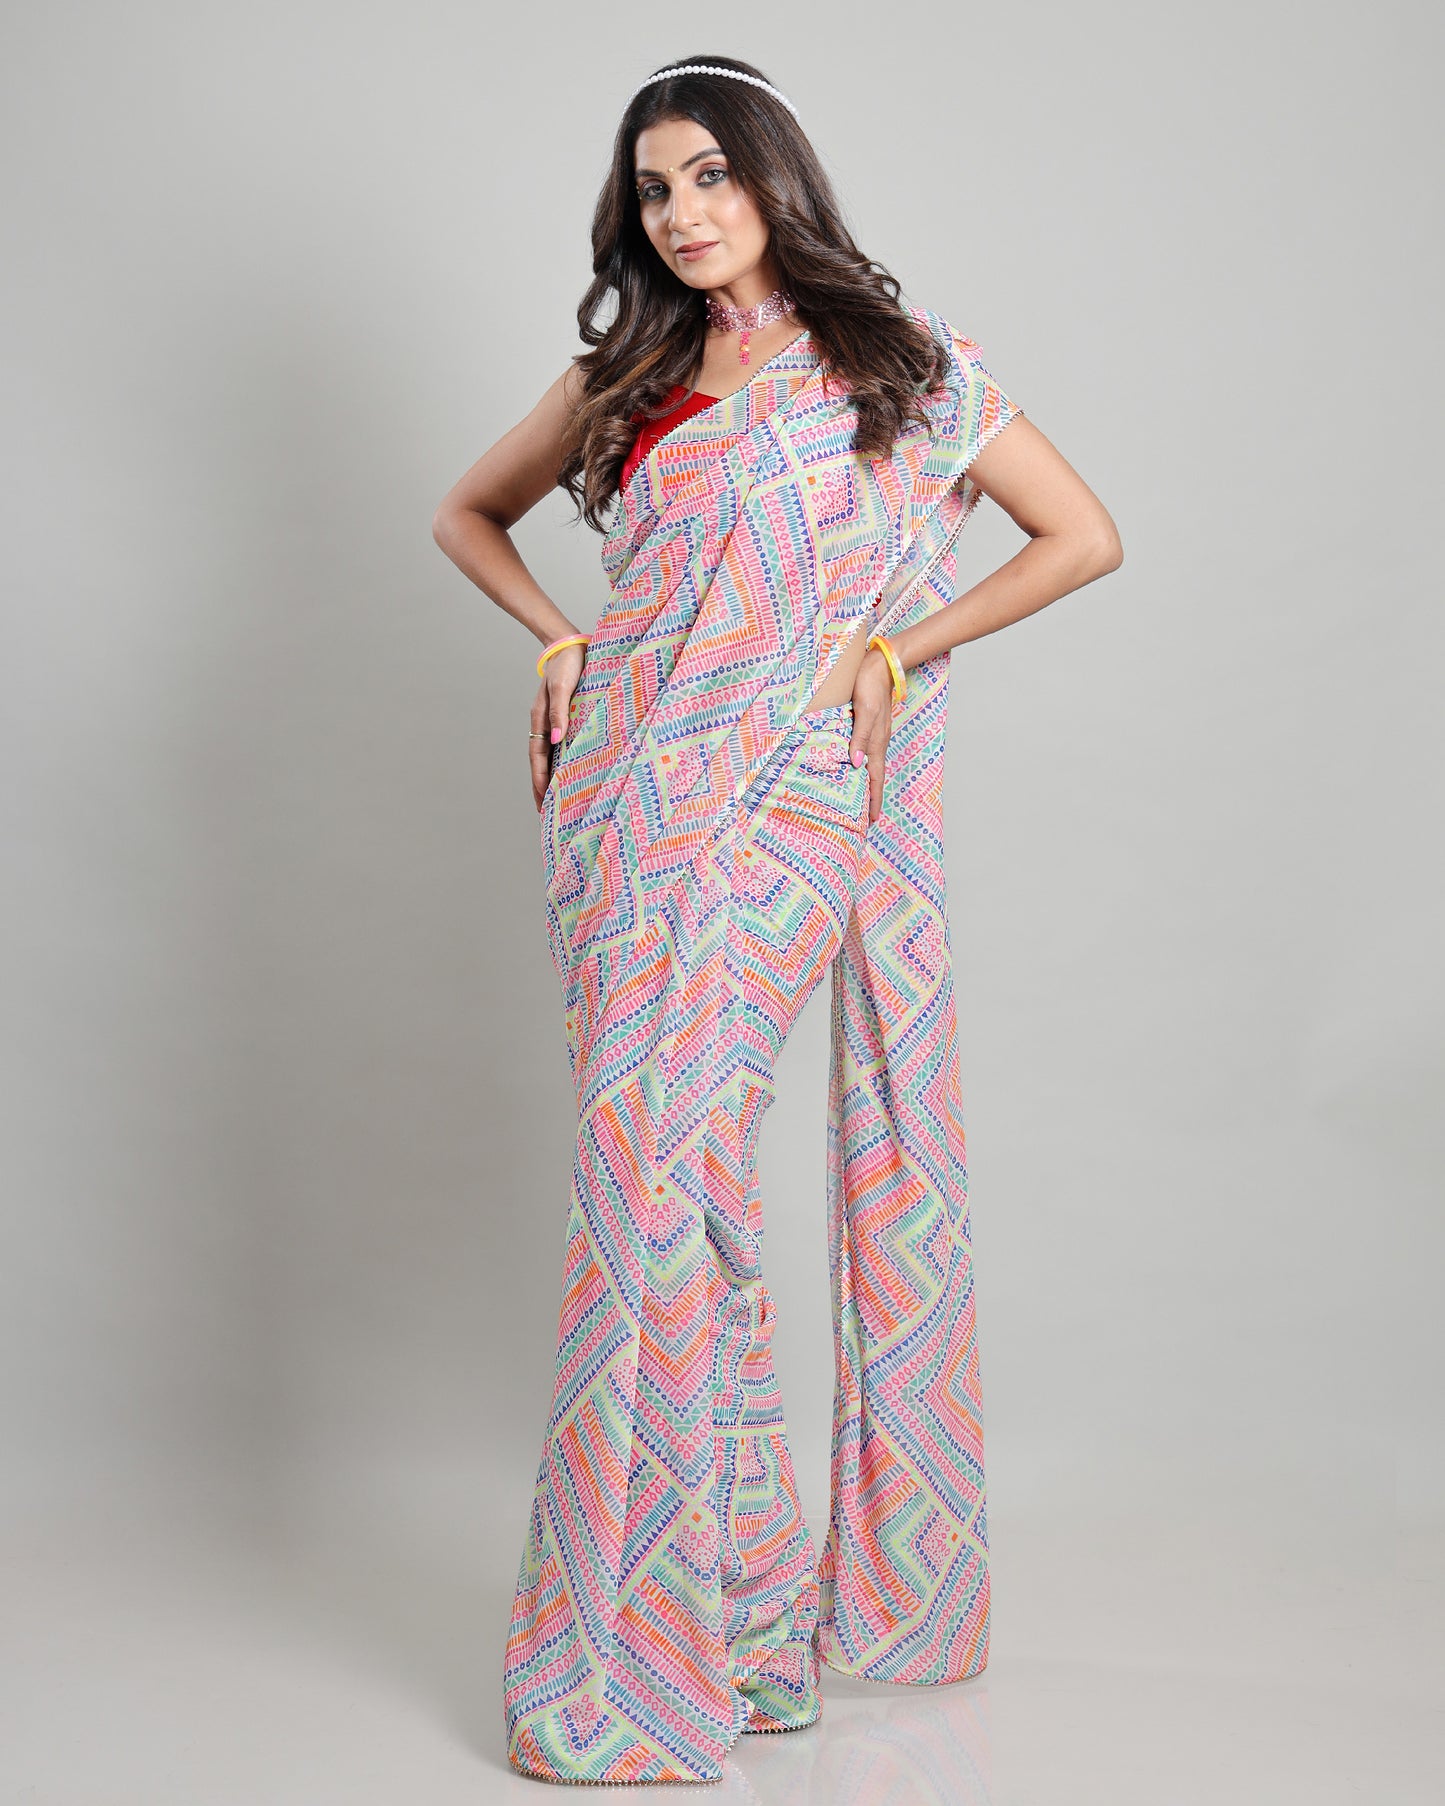 Neon Empowered: A Georgette Saree For The Modern Woman